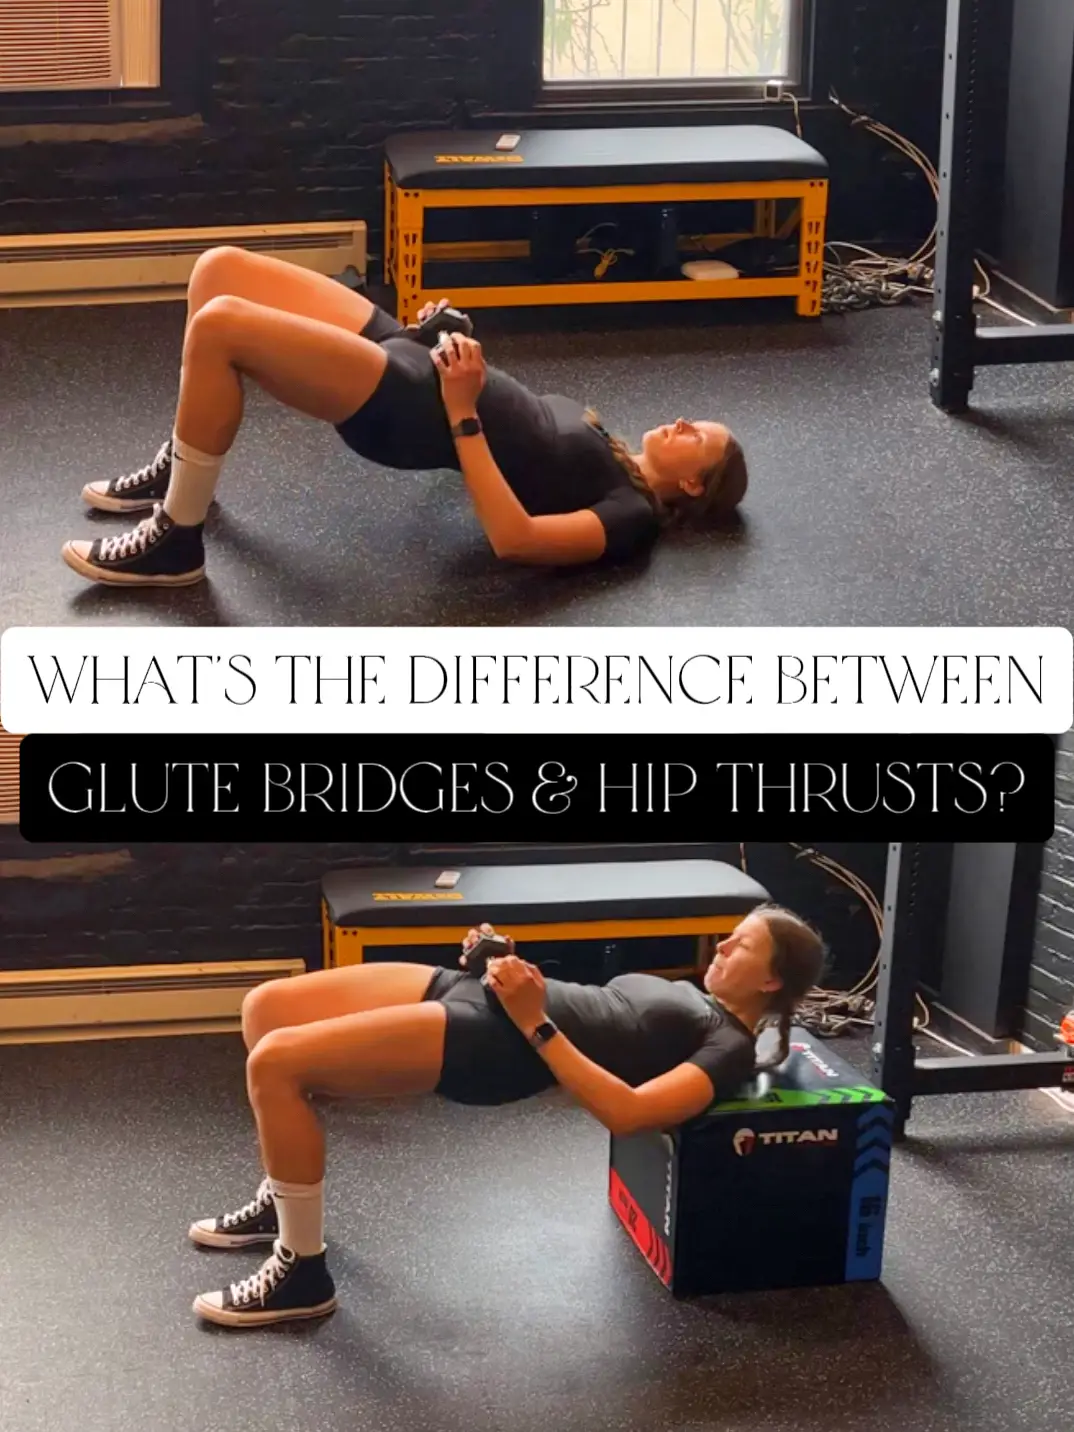 Glute Bridge vs. Hip Thrust: What's the Difference?